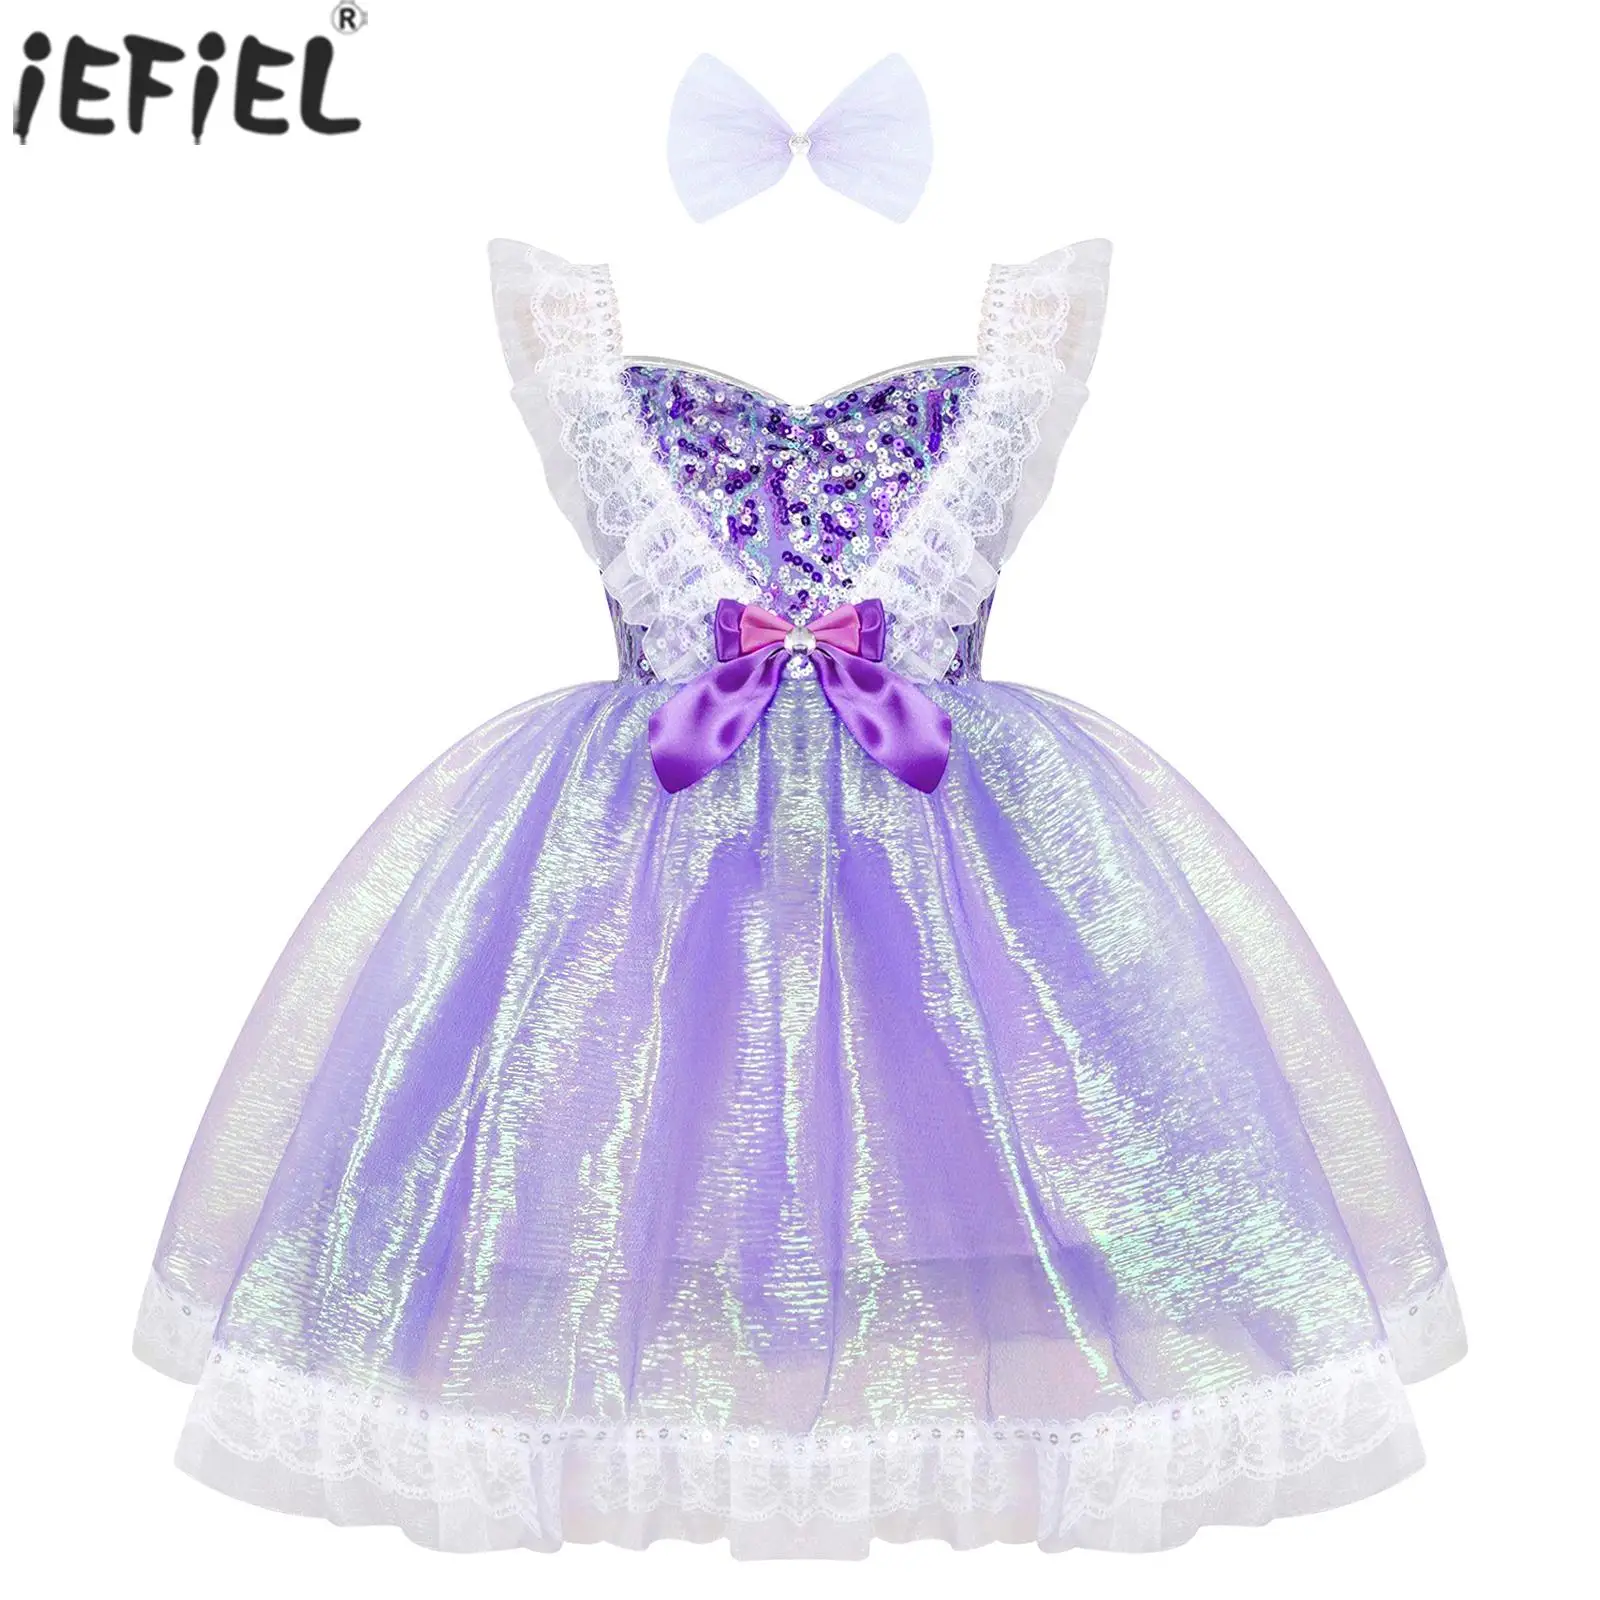 

Kids Girls Princess Dress Sleeveless Shiny Sequin Tutu Ruffle Lace Party Dresses Childrens Day Birthday with Bowknot Hair Clip